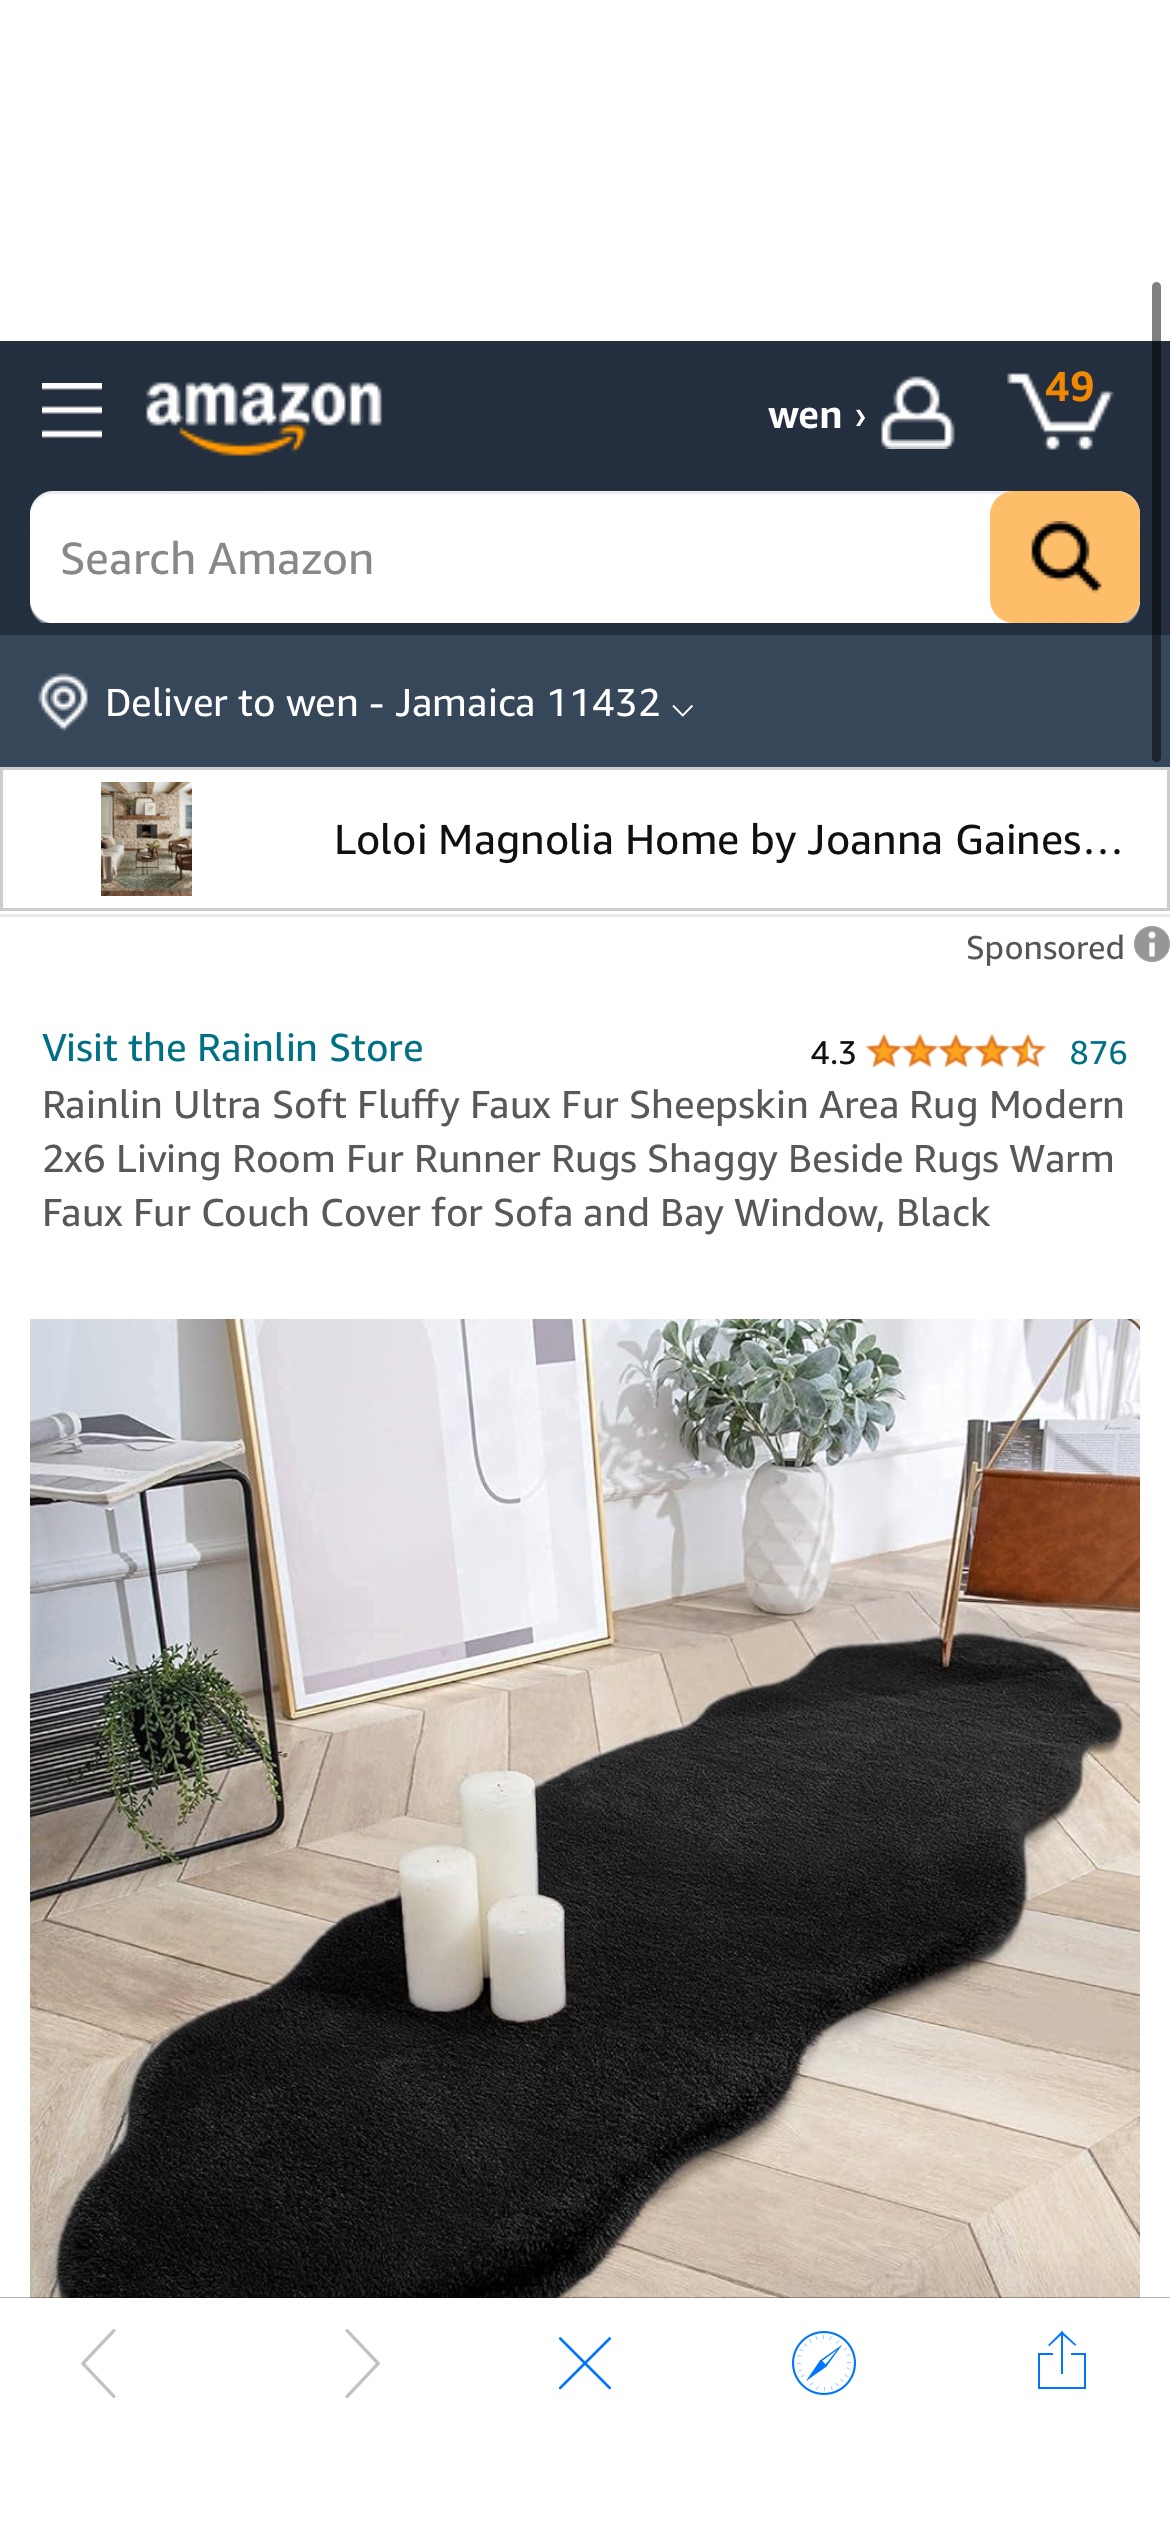 Amazon.com: Rainlin Ultra Soft Fluffy Faux Fur Sheepskin Area Rug Modern 2x6 Living Room Fur Runner Rugs Shaggy Beside Rugs Warm Faux Fur Couch Cover for Sofa and Bay Window, Black : Home & Kitchen